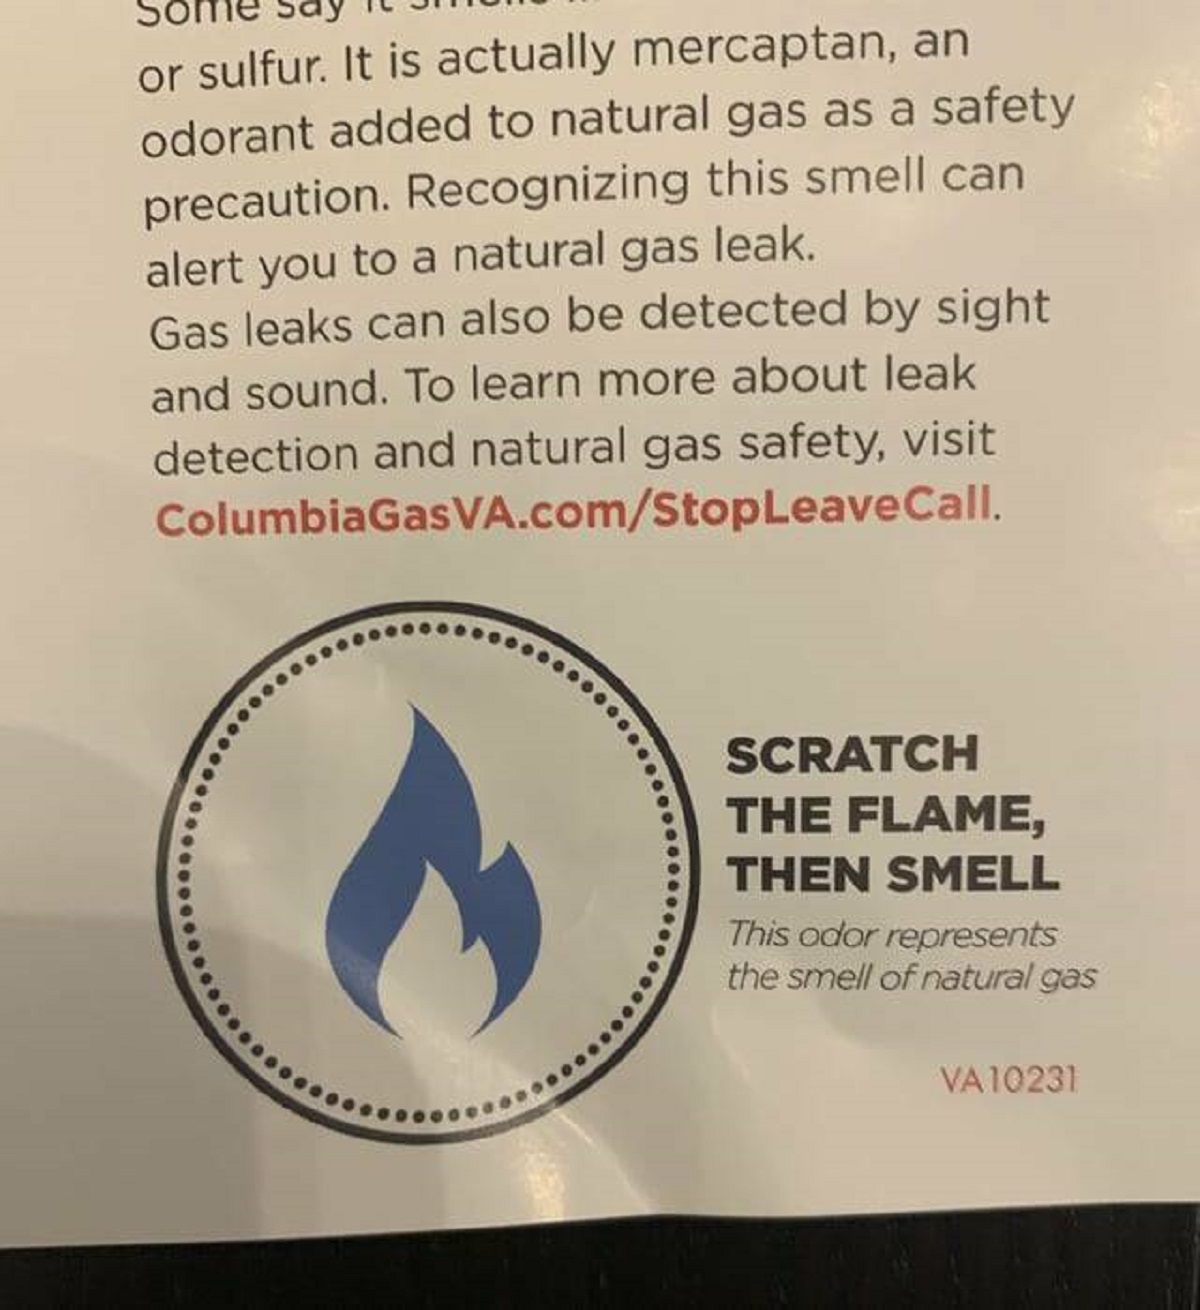 label - or sulfur. It is actually mercaptan, an odorant added to natural gas as a safety precaution. Recognizing this smell can alert you to a natural gas leak. Gas leaks can also be detected by sight and sound. To learn more about leak detection and natu